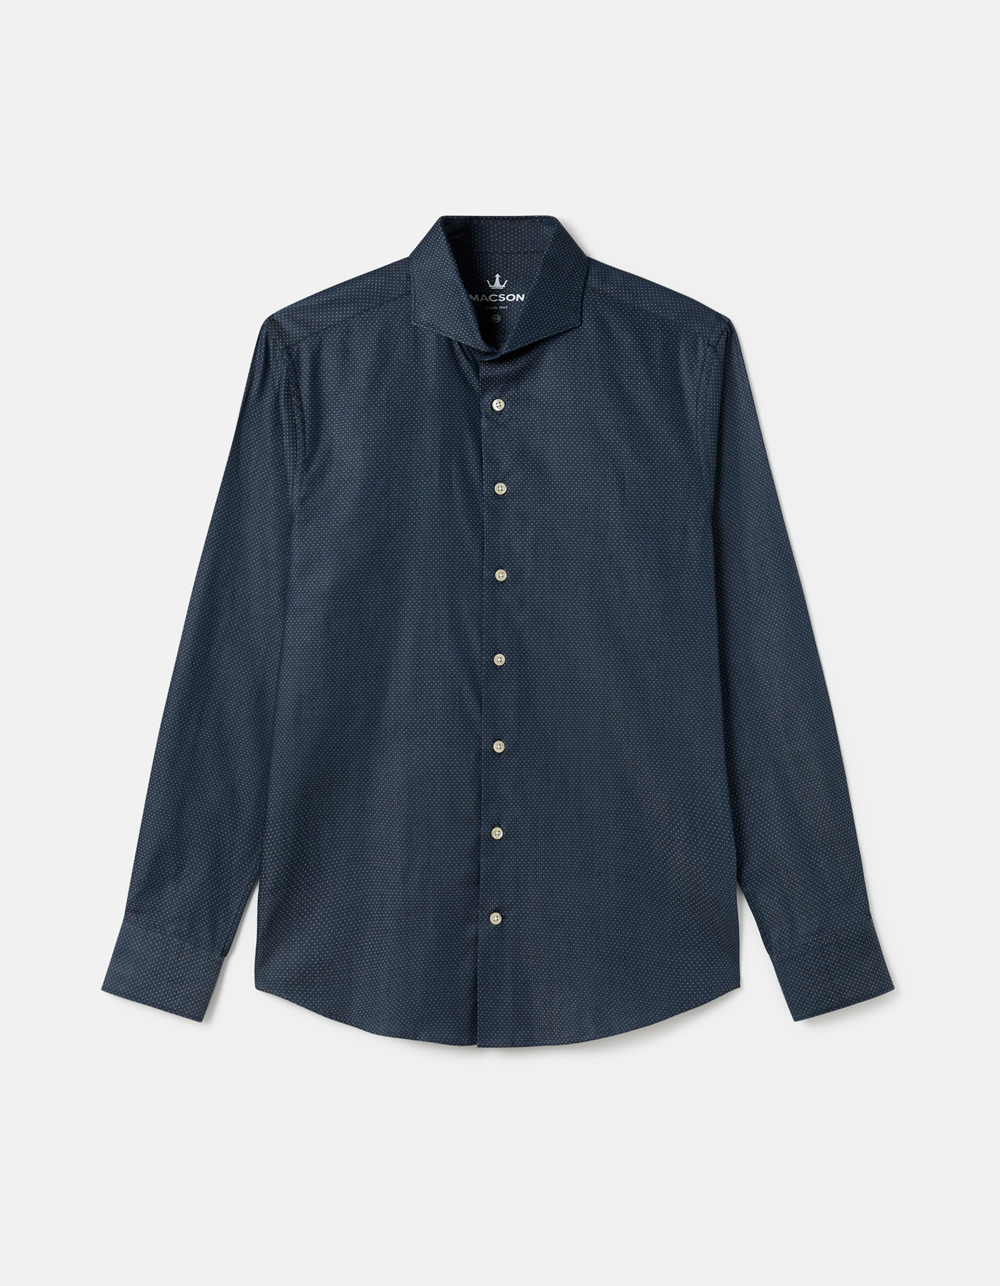 Navy blue micro-dotted shirt